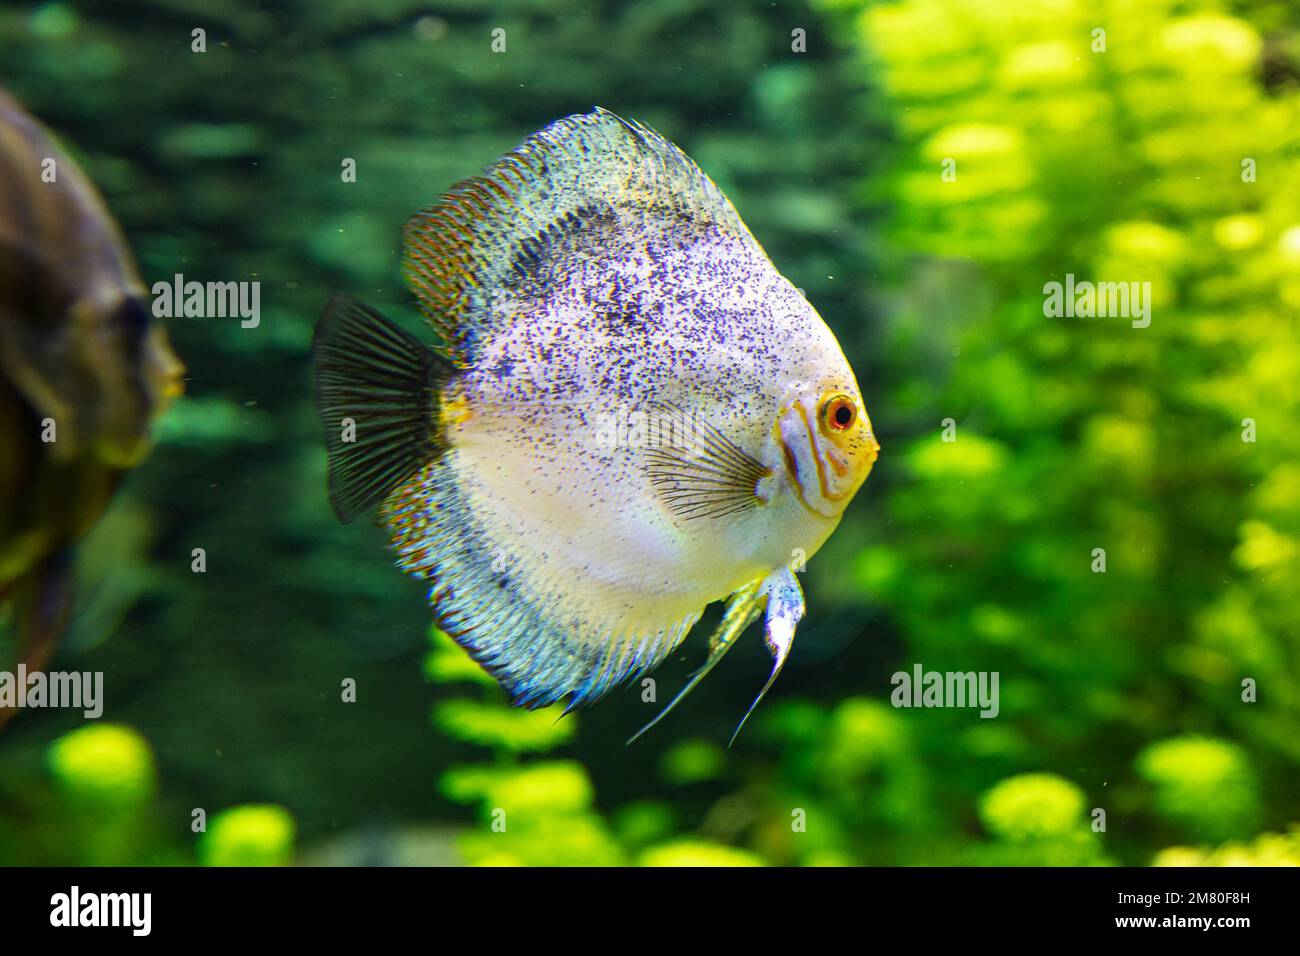 Fish in the water. Aquatic creature. Water world. Sea, ocean, lake and river fauna. Zoo and zoology. Nature and animal photography. Stock Photo